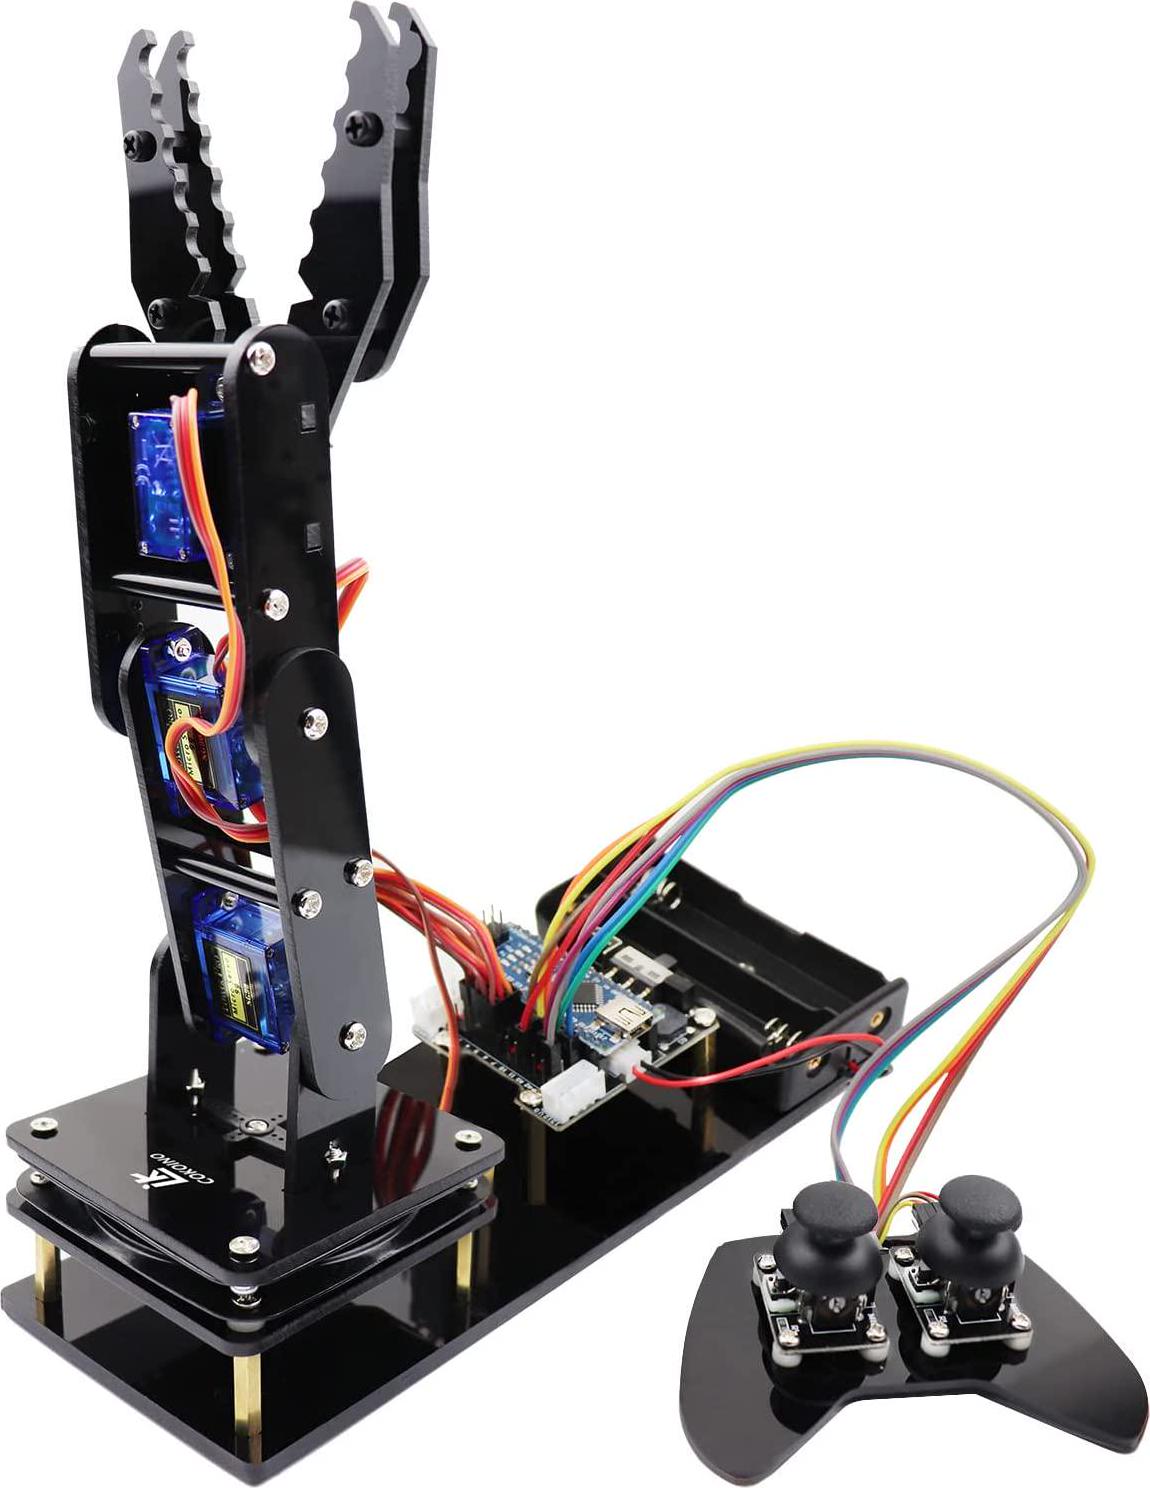 LK COKOINO, LK COKOINO 4 Axis Robotic Arm Kit for Arduino, Mini Desktop Robot Arm for Children Age 12+, Compliment Engineering, Math, Science, and Technology Learning Strategy